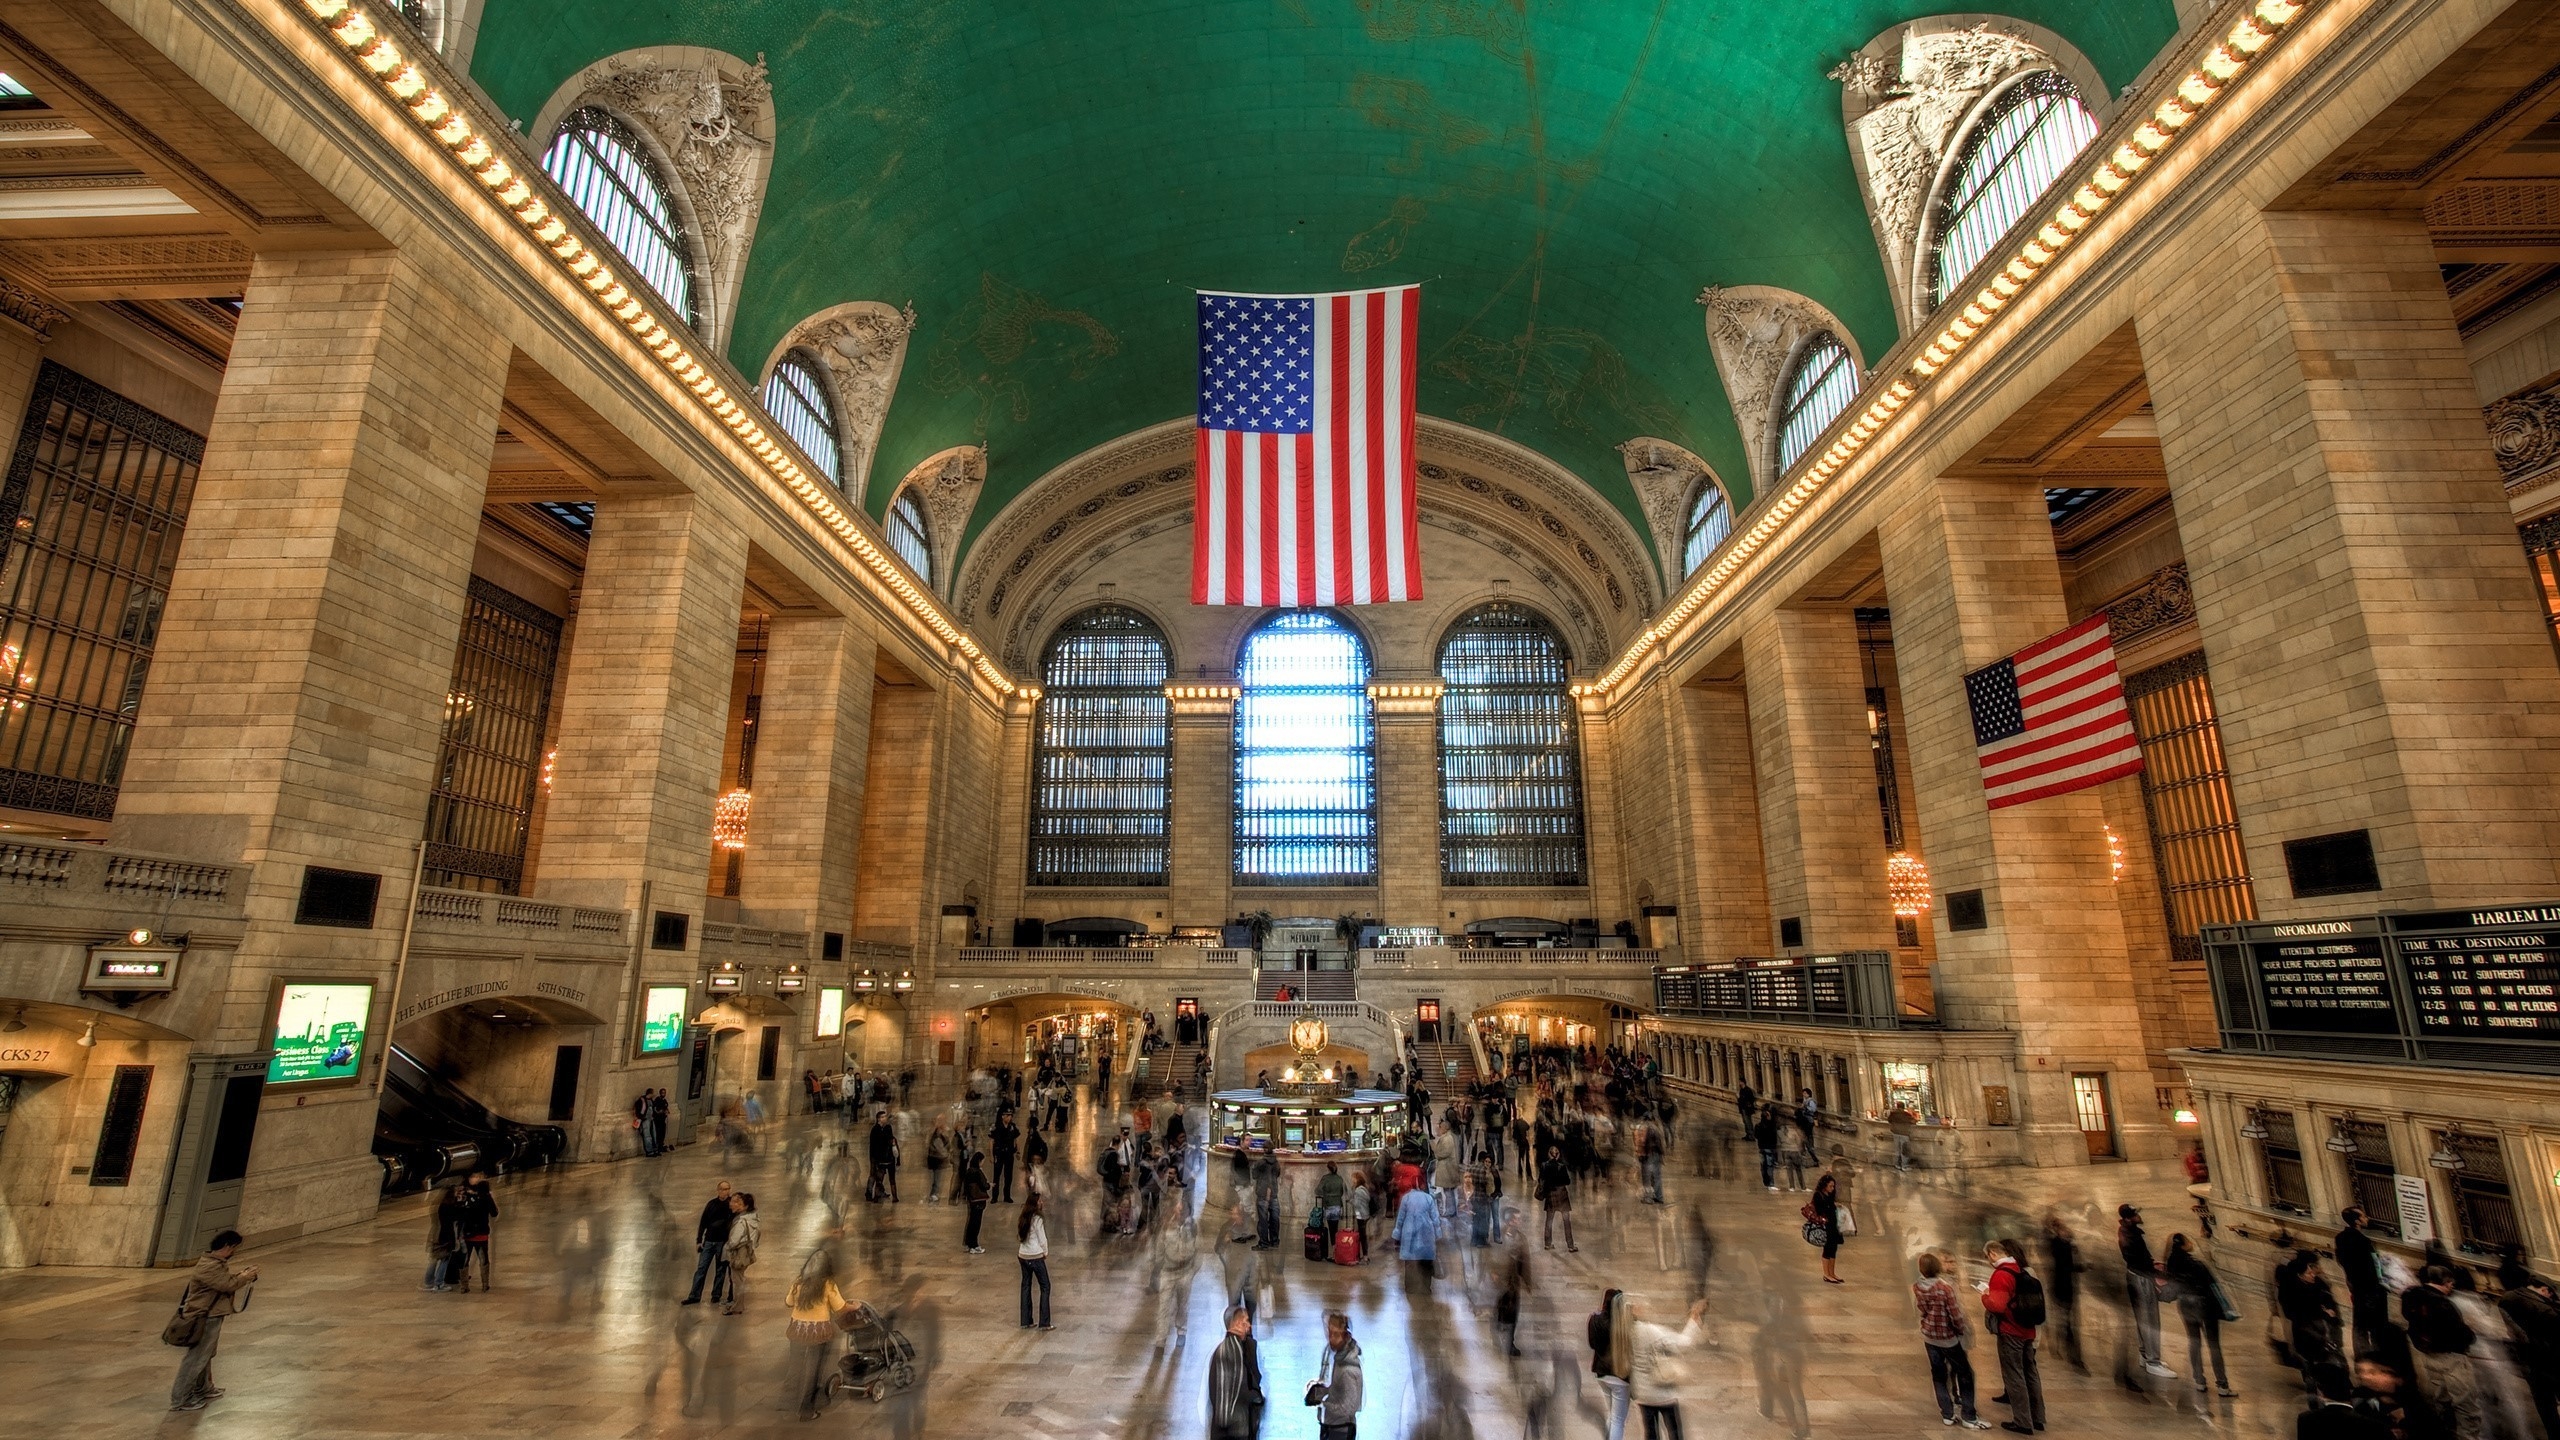 Grand Central Station for 2560x1440 HDTV resolution